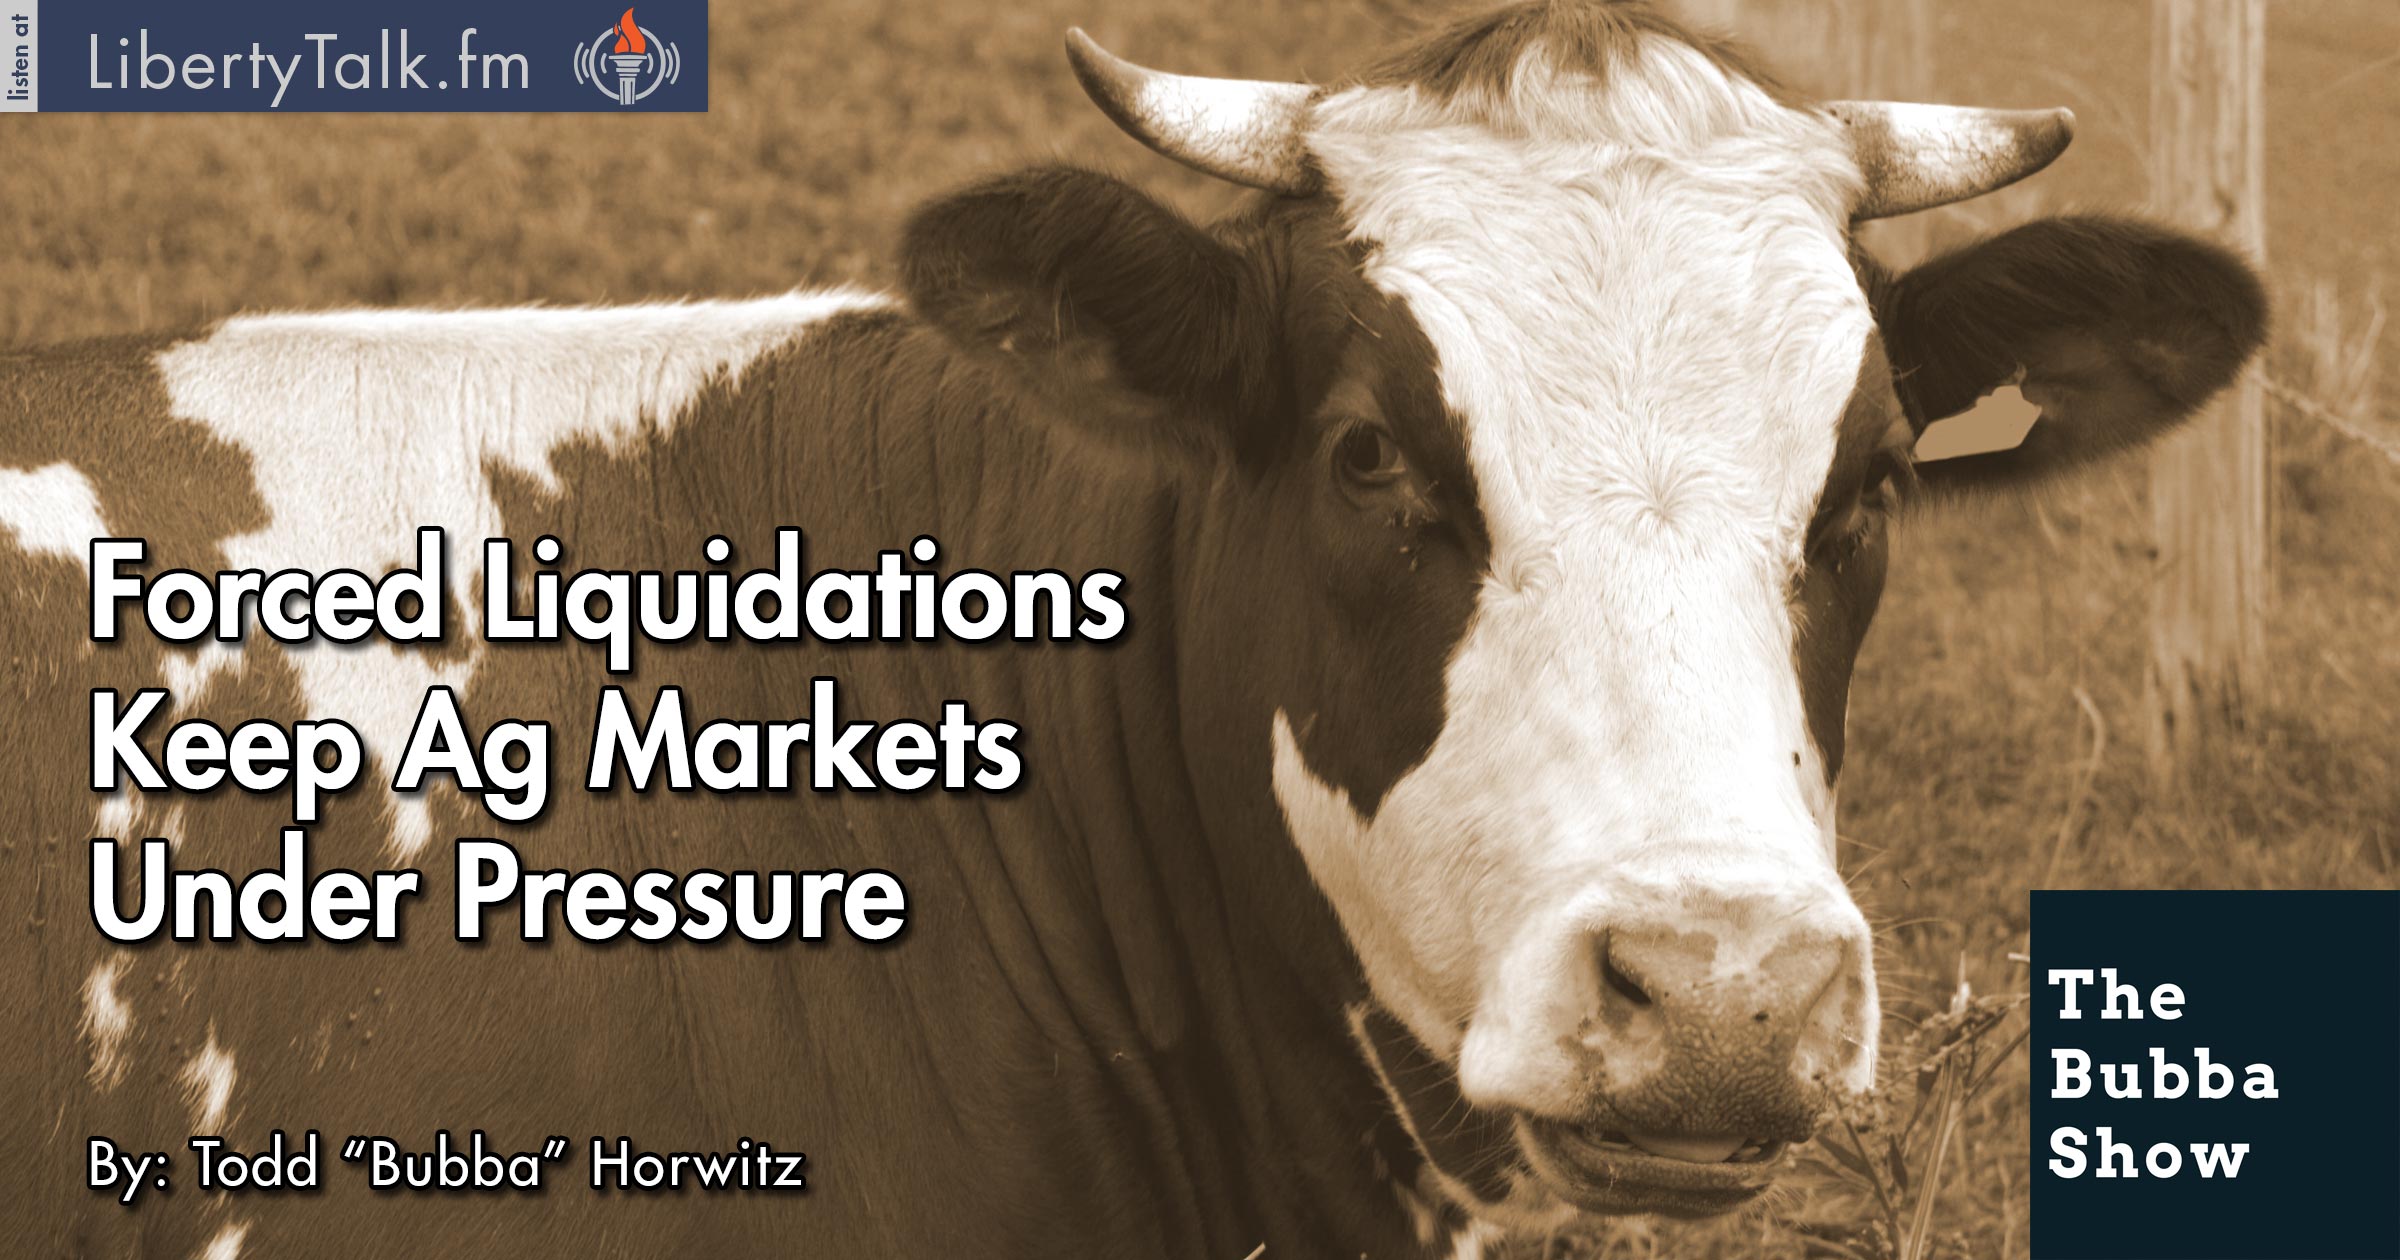 Forced Liquidations Keep Ag Markets Under Pressure - Bubba Show